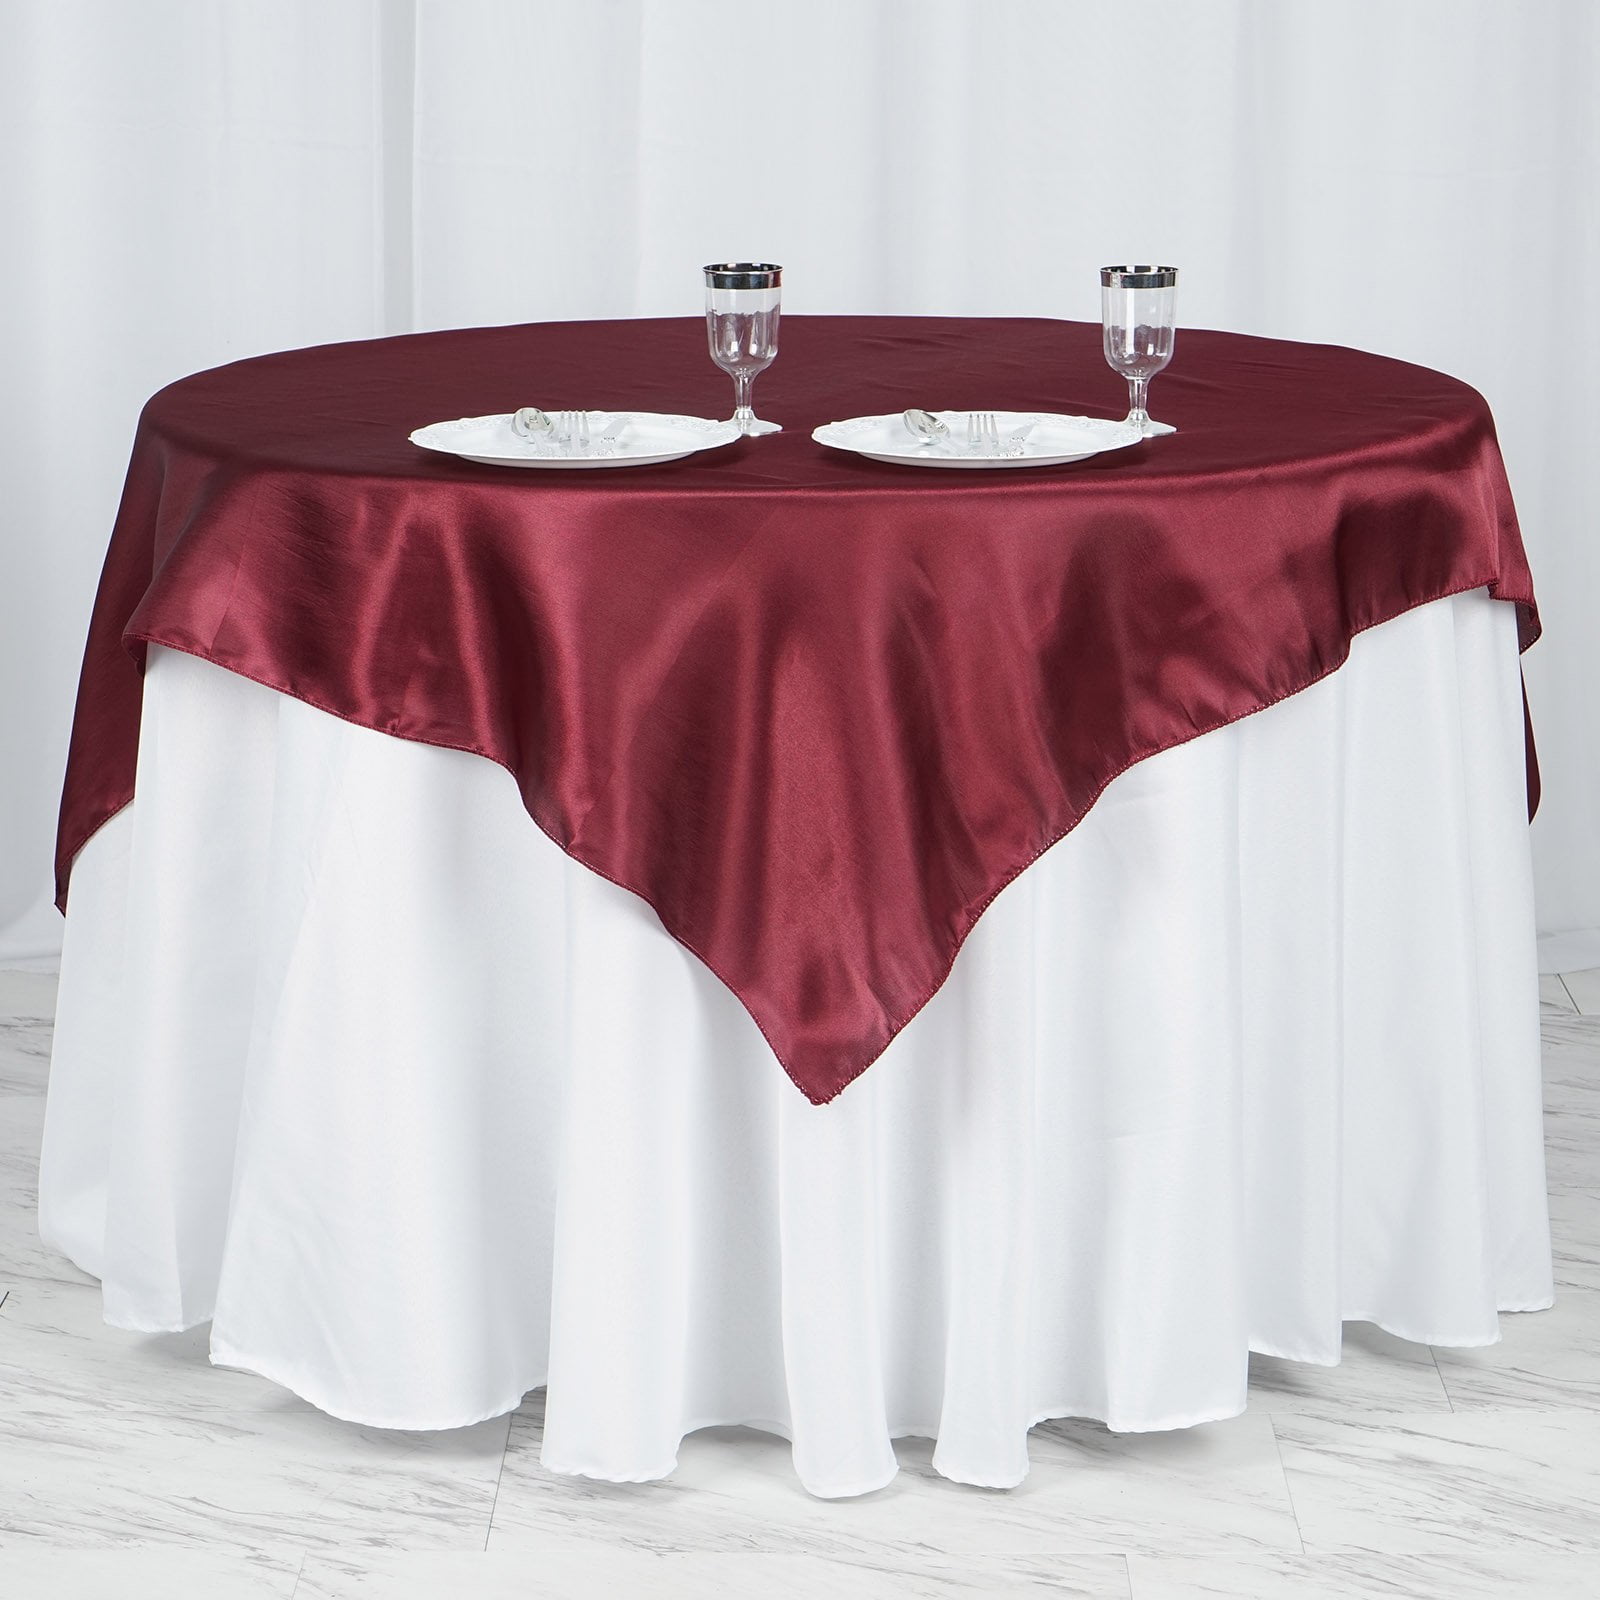 Efavormart 60 SATIN Square Tablecloth Overlay For Wedding Catering 